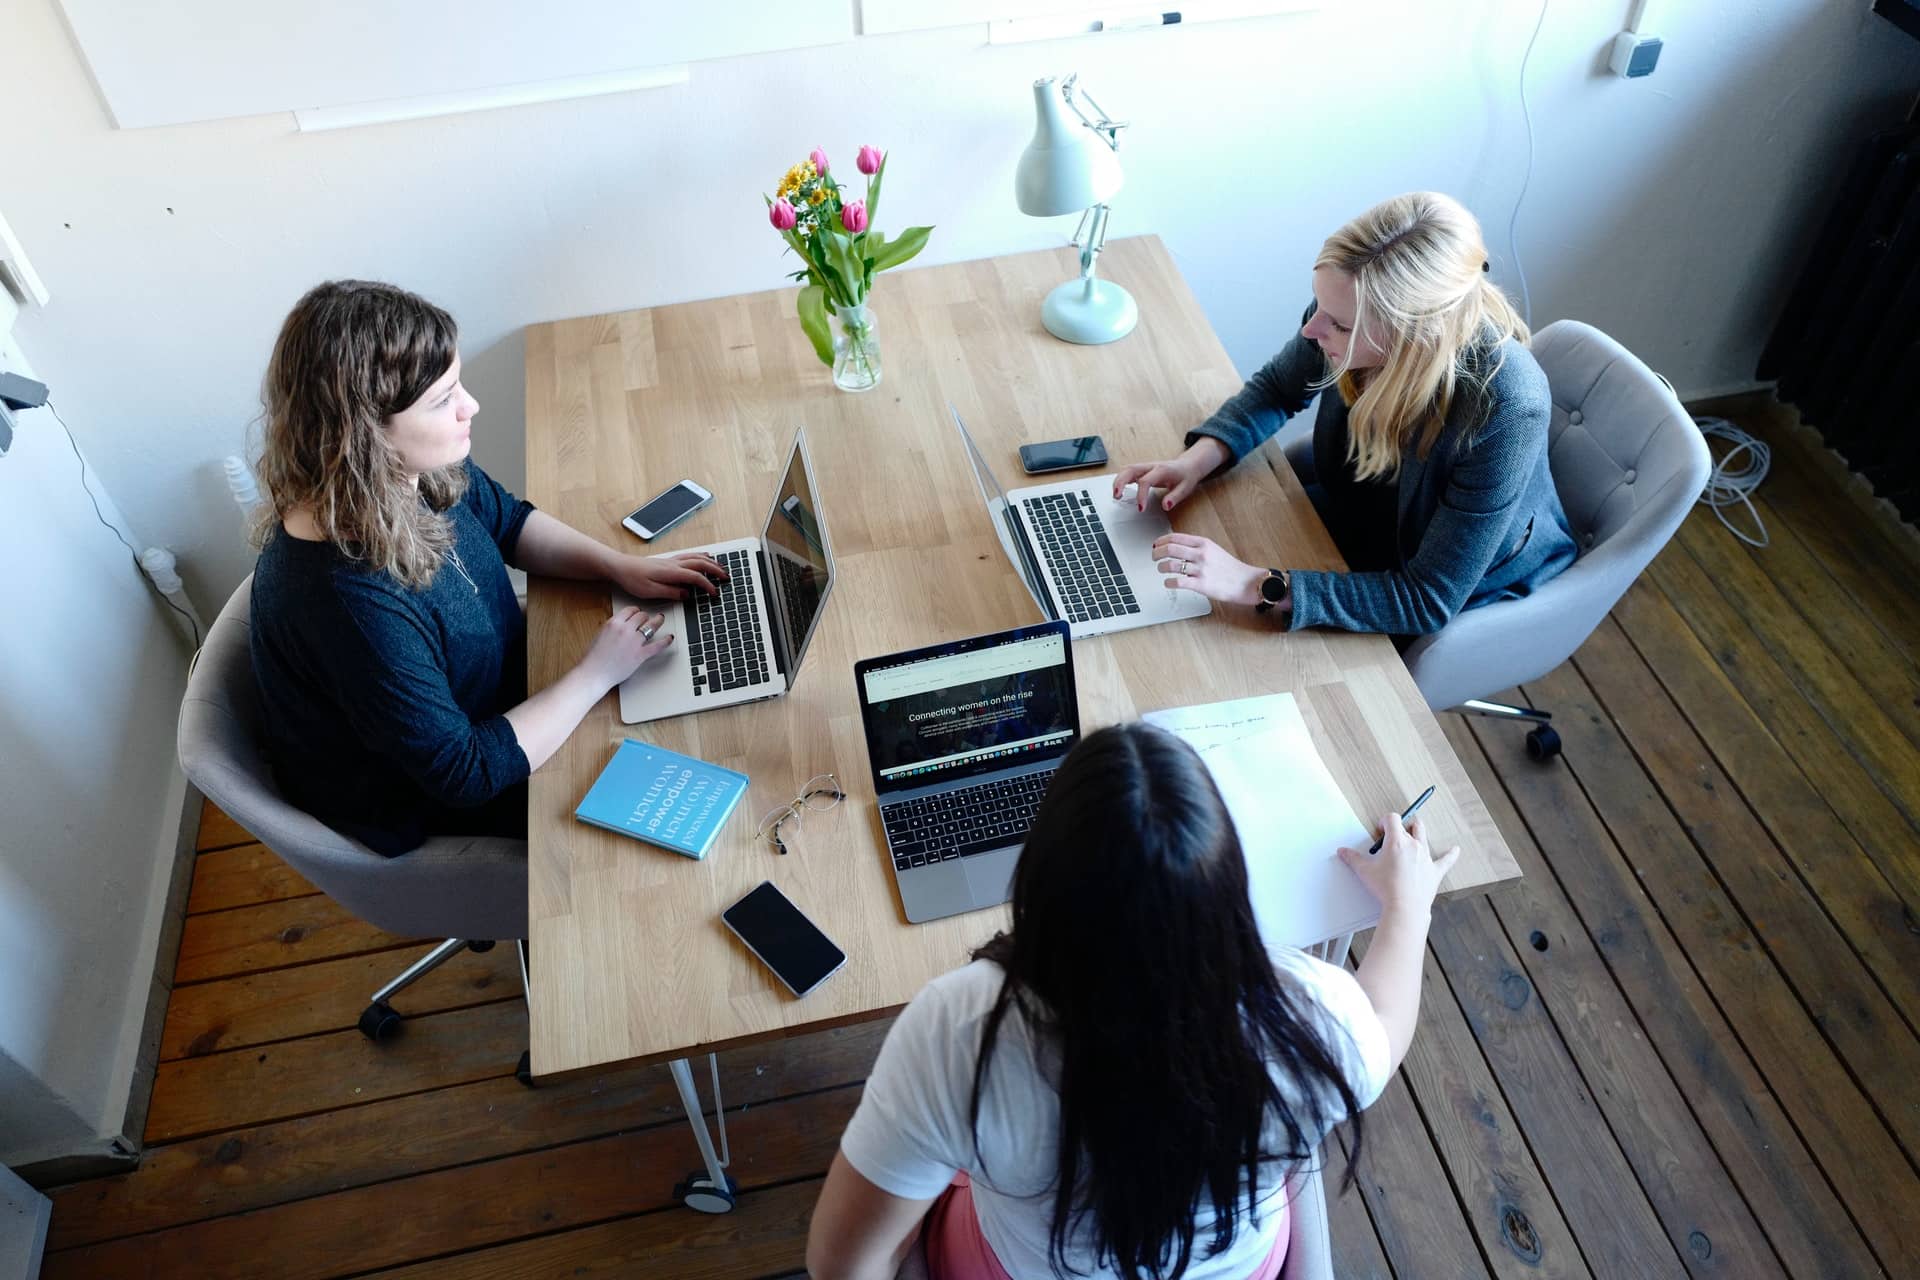 The image shows three women talking and working on their laptops.